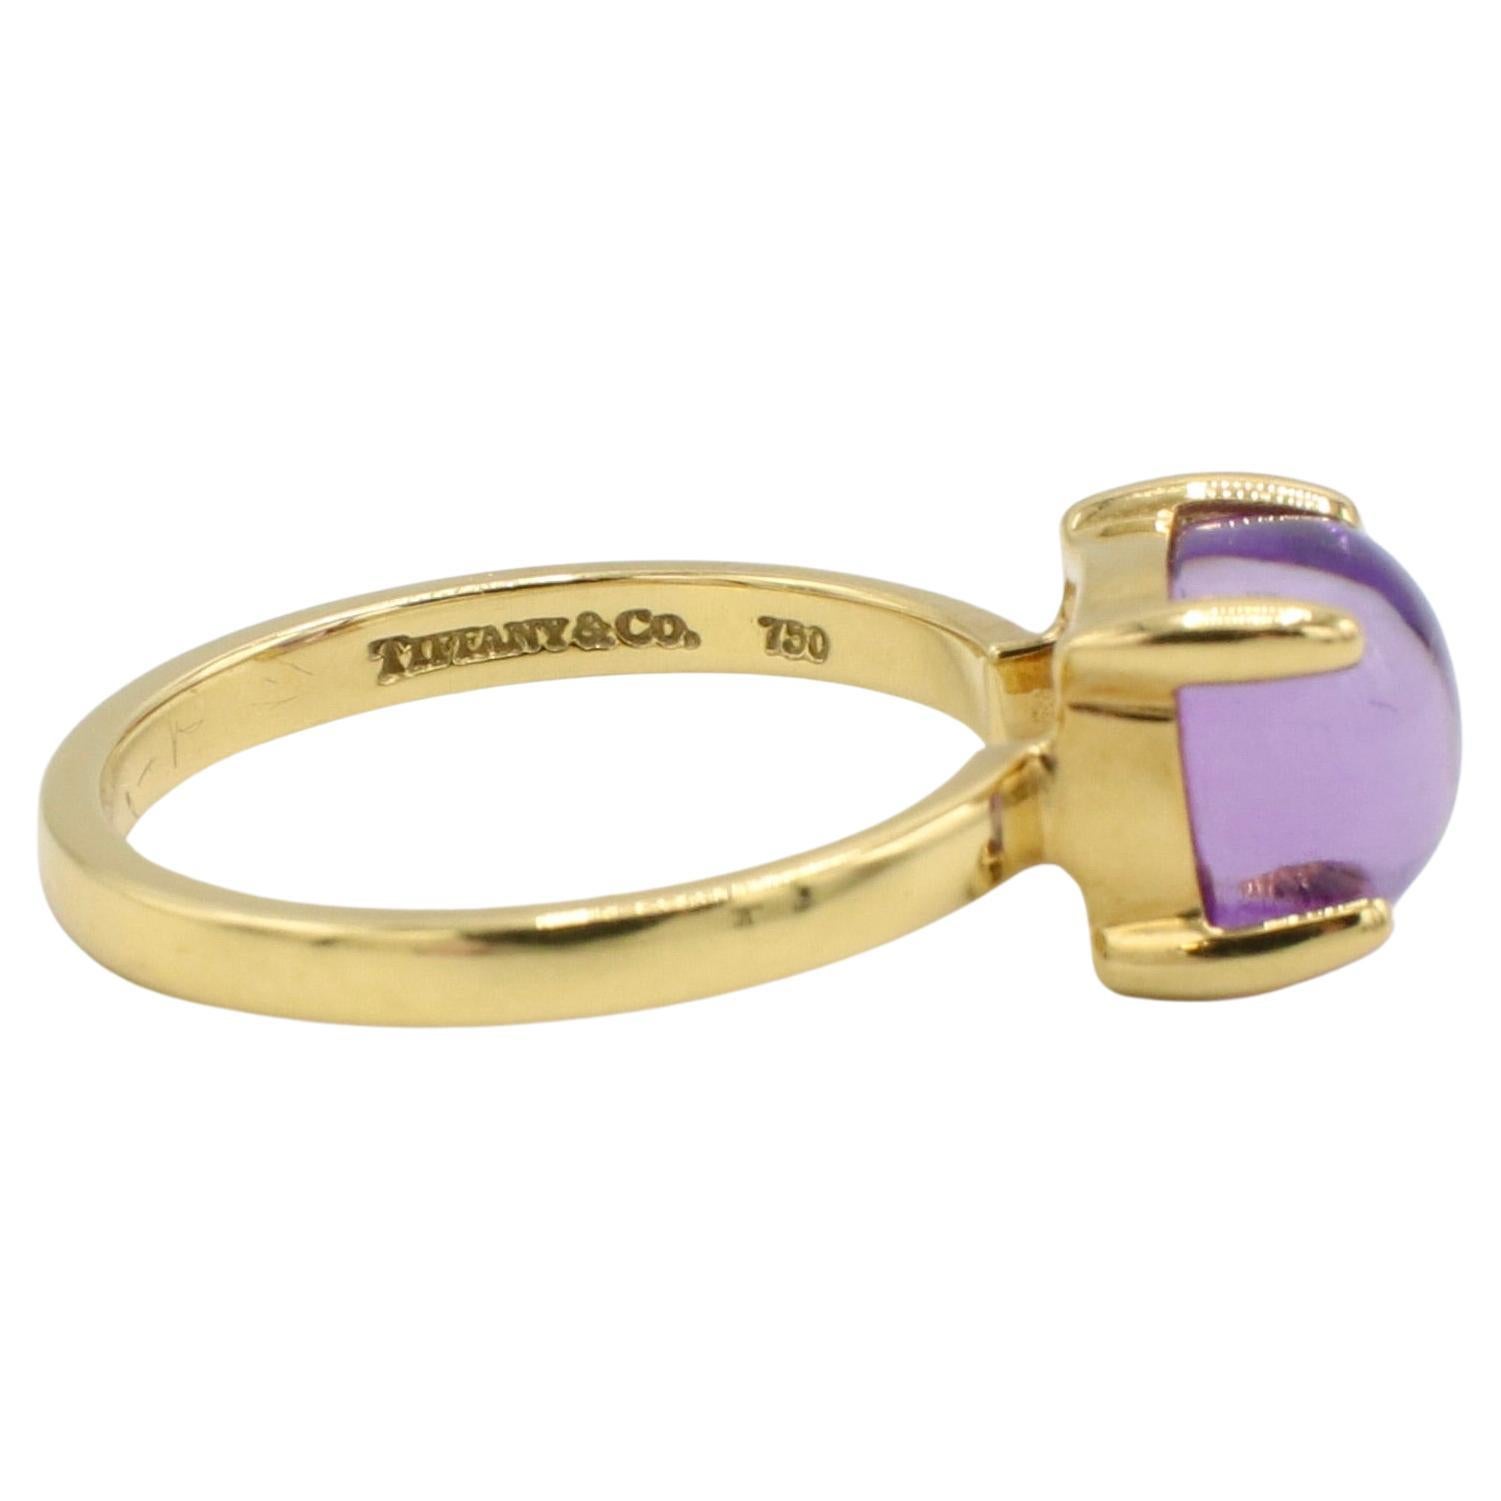 Tiffany & Co. Paloma Picasso 18k Yellow Gold Amethyst Sugar Stacks Ring
Metal: 18k yellow gold 
Weight: 3.48 grams
Amethyst: 7 x 7mm
Height: 6.5mm
Size: 5.5 US
Signed: ©Paloma Picasso Tiffany & Co. 750
